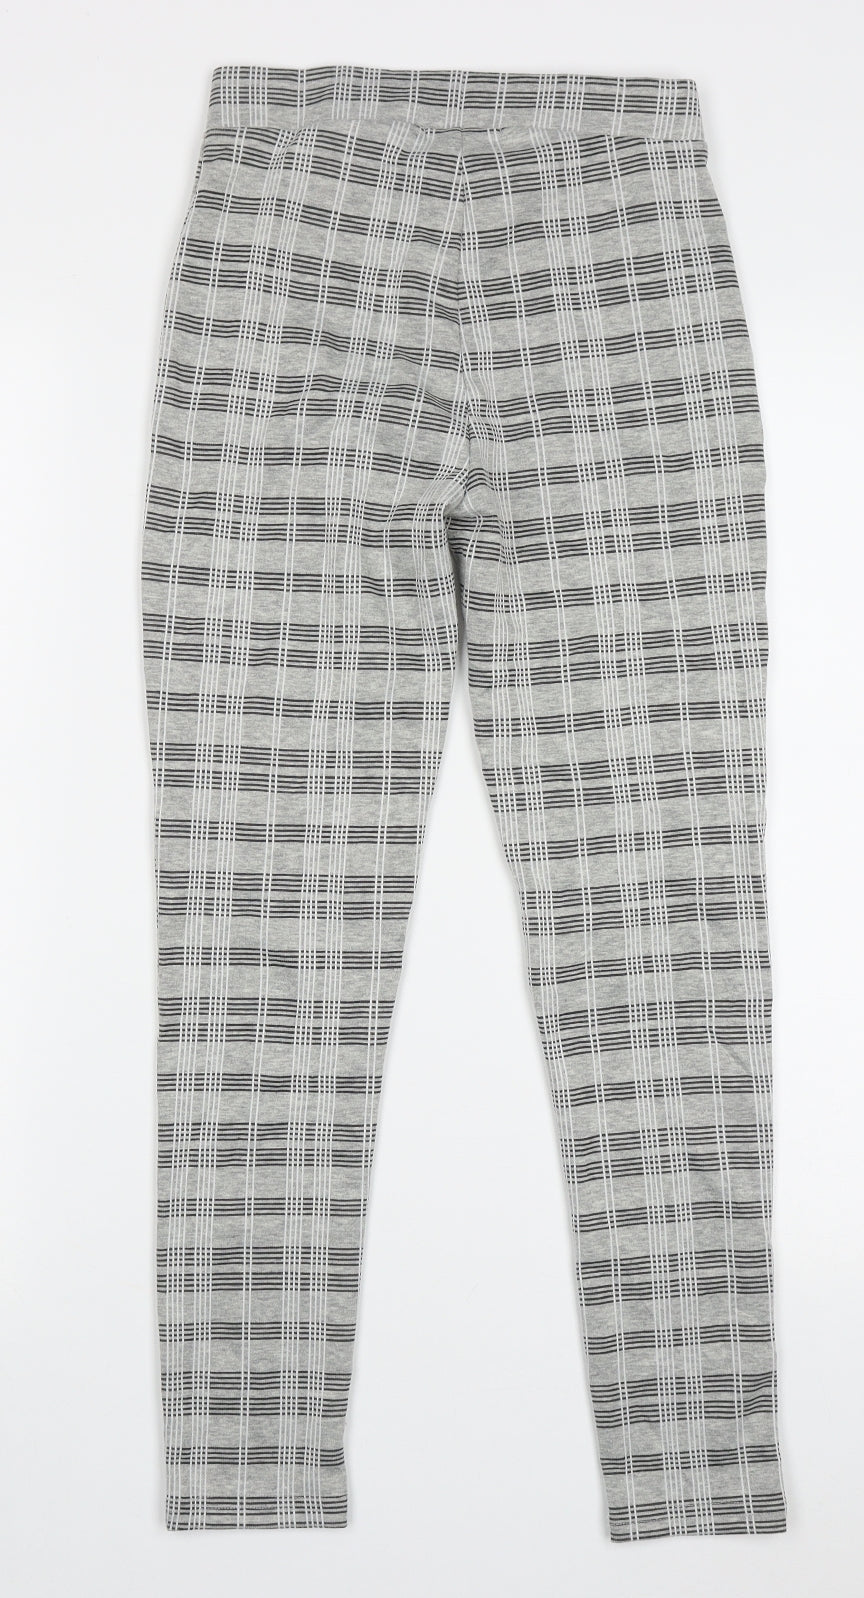 Primark Girls Grey Check Polyester Capri Trousers Size 11-12 Years  Regular Pullover